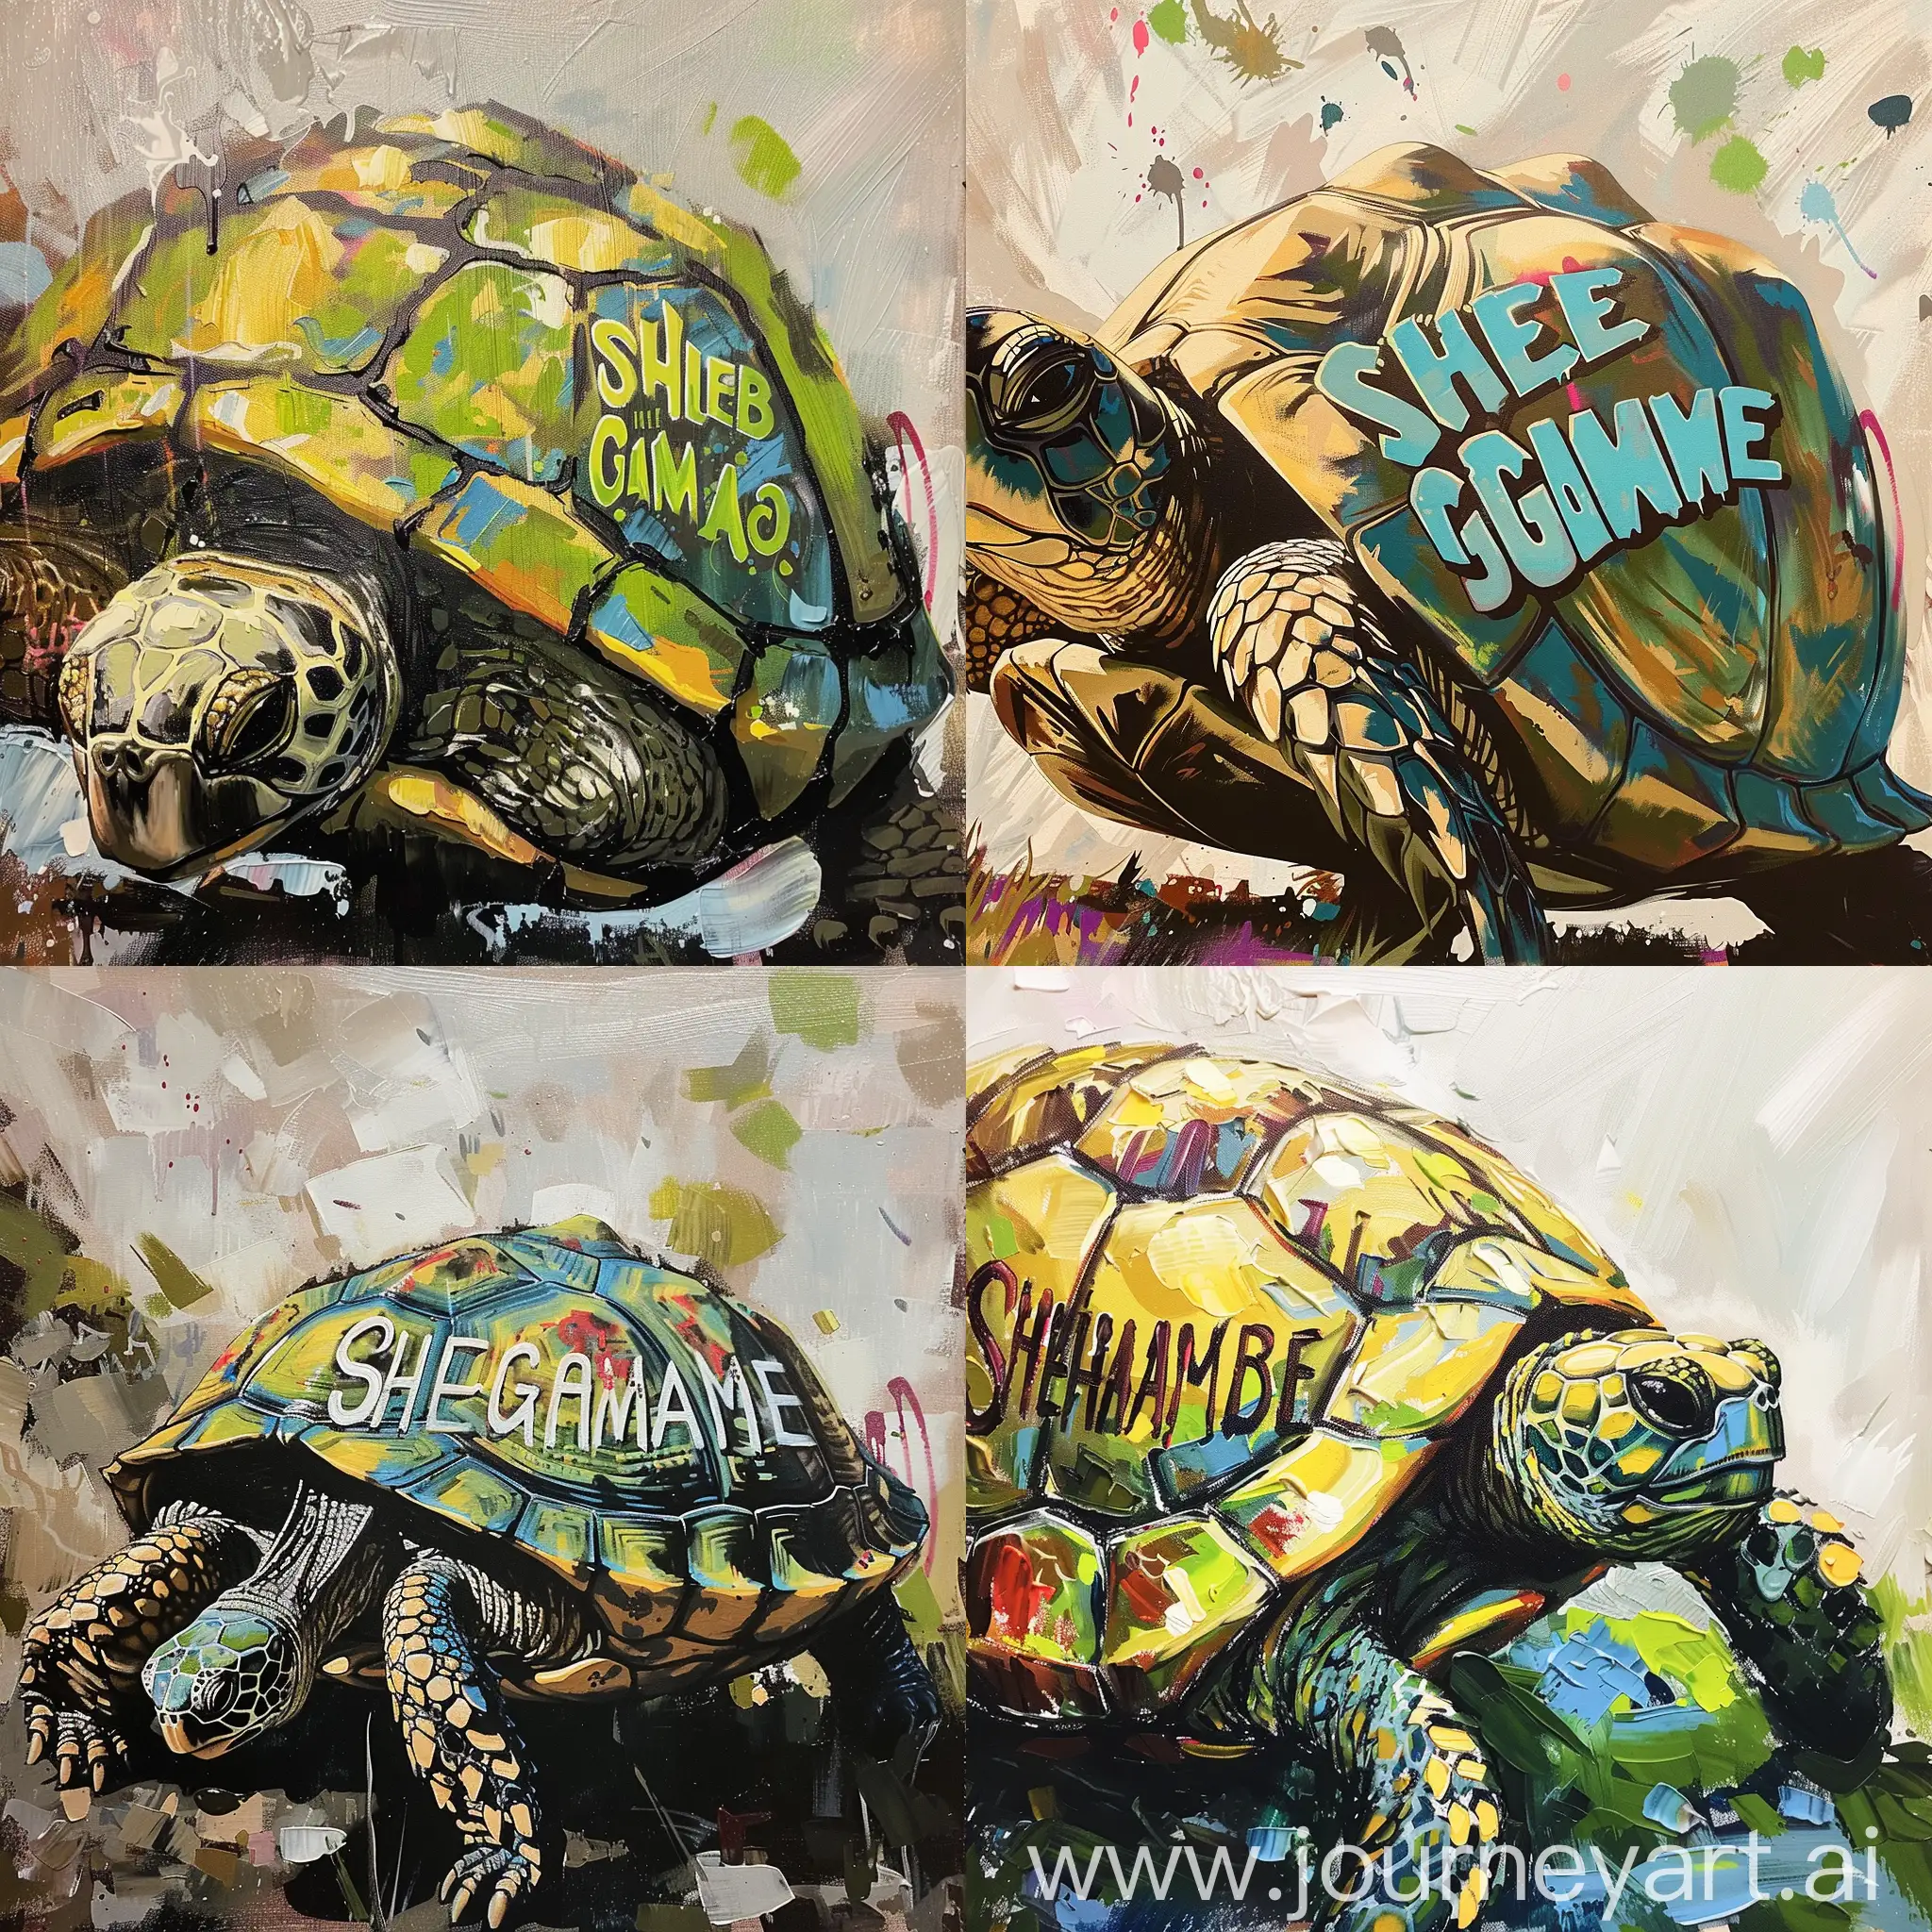 i want to create an image of a turtle. the perspective should be looking down at the turtle so you see its shell.  the image should look like a painting with rough brush strocks and bright colors.  the words Shell Game should appear on the turtles back and in graffiti style and look like they were spreay painted on